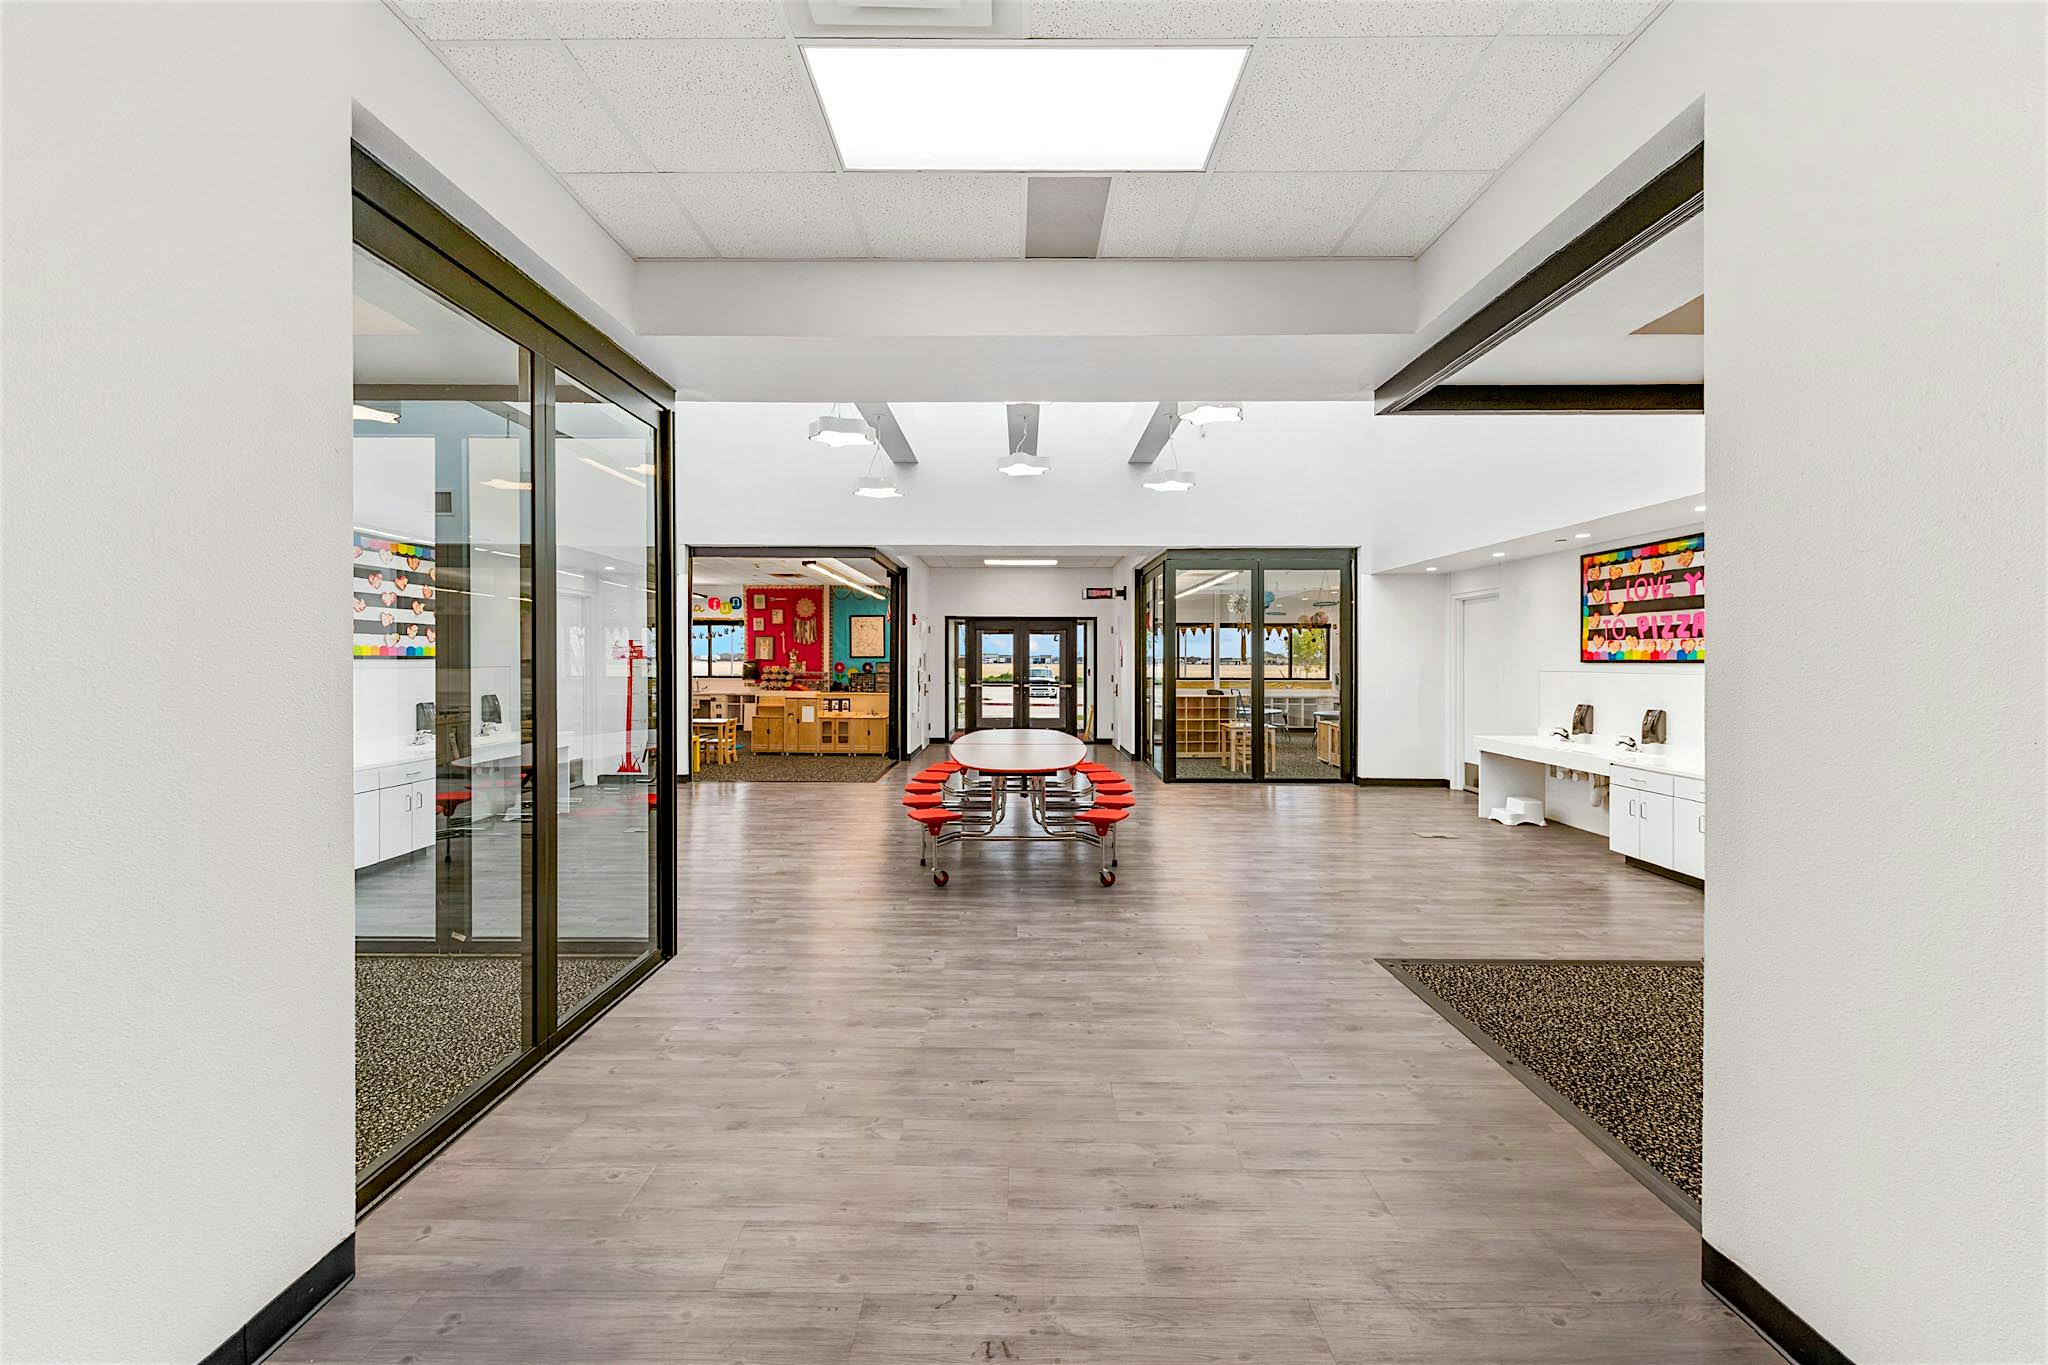 learning hub design with sliding glass walls